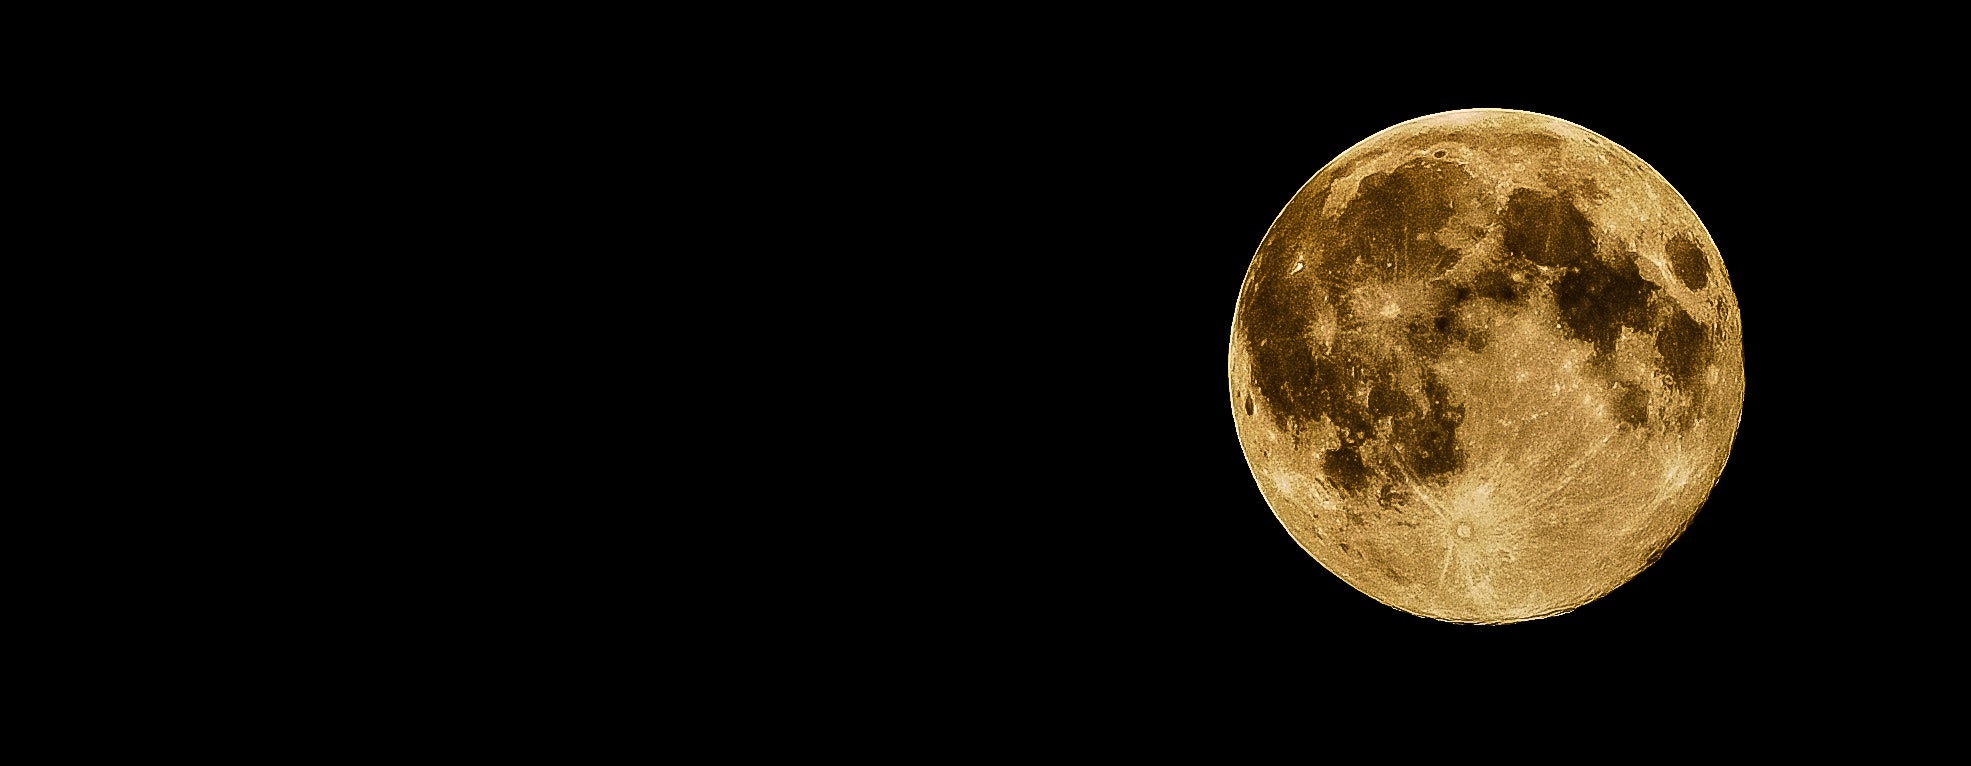 A large yellow moon in the sky - Moon